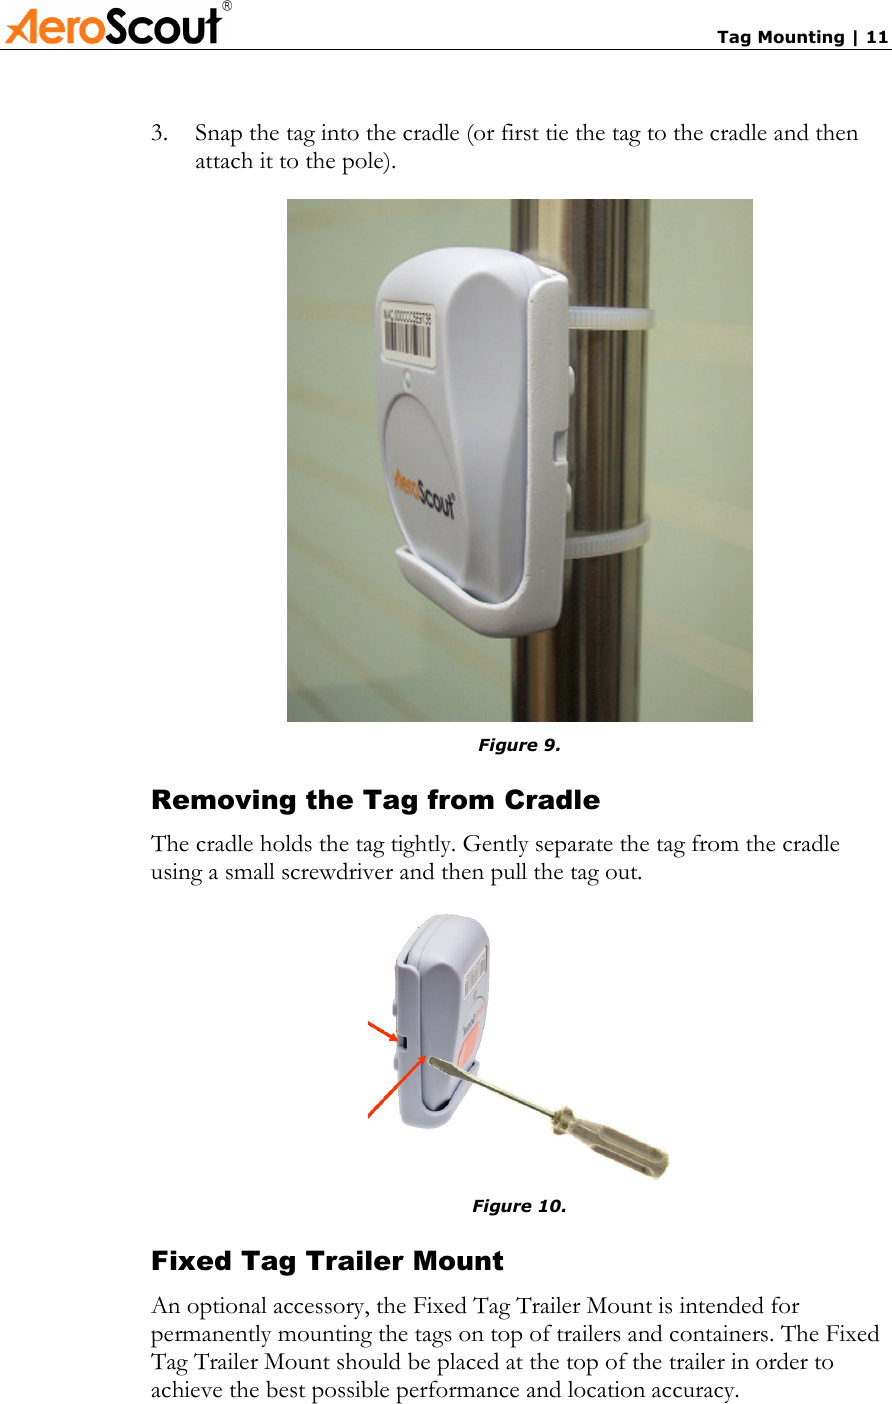       Tag Mounting | 11 3.  Snap the tag into the cradle (or first tie the tag to the cradle and then attach it to the pole).  Figure 9. Removing the Tag from Cradle The cradle holds the tag tightly. Gently separate the tag from the cradle using a small screwdriver and then pull the tag out.  Figure 10. Fixed Tag Trailer Mount An optional accessory, the Fixed Tag Trailer Mount is intended for permanently mounting the tags on top of trailers and containers. The Fixed Tag Trailer Mount should be placed at the top of the trailer in order to achieve the best possible performance and location accuracy. 